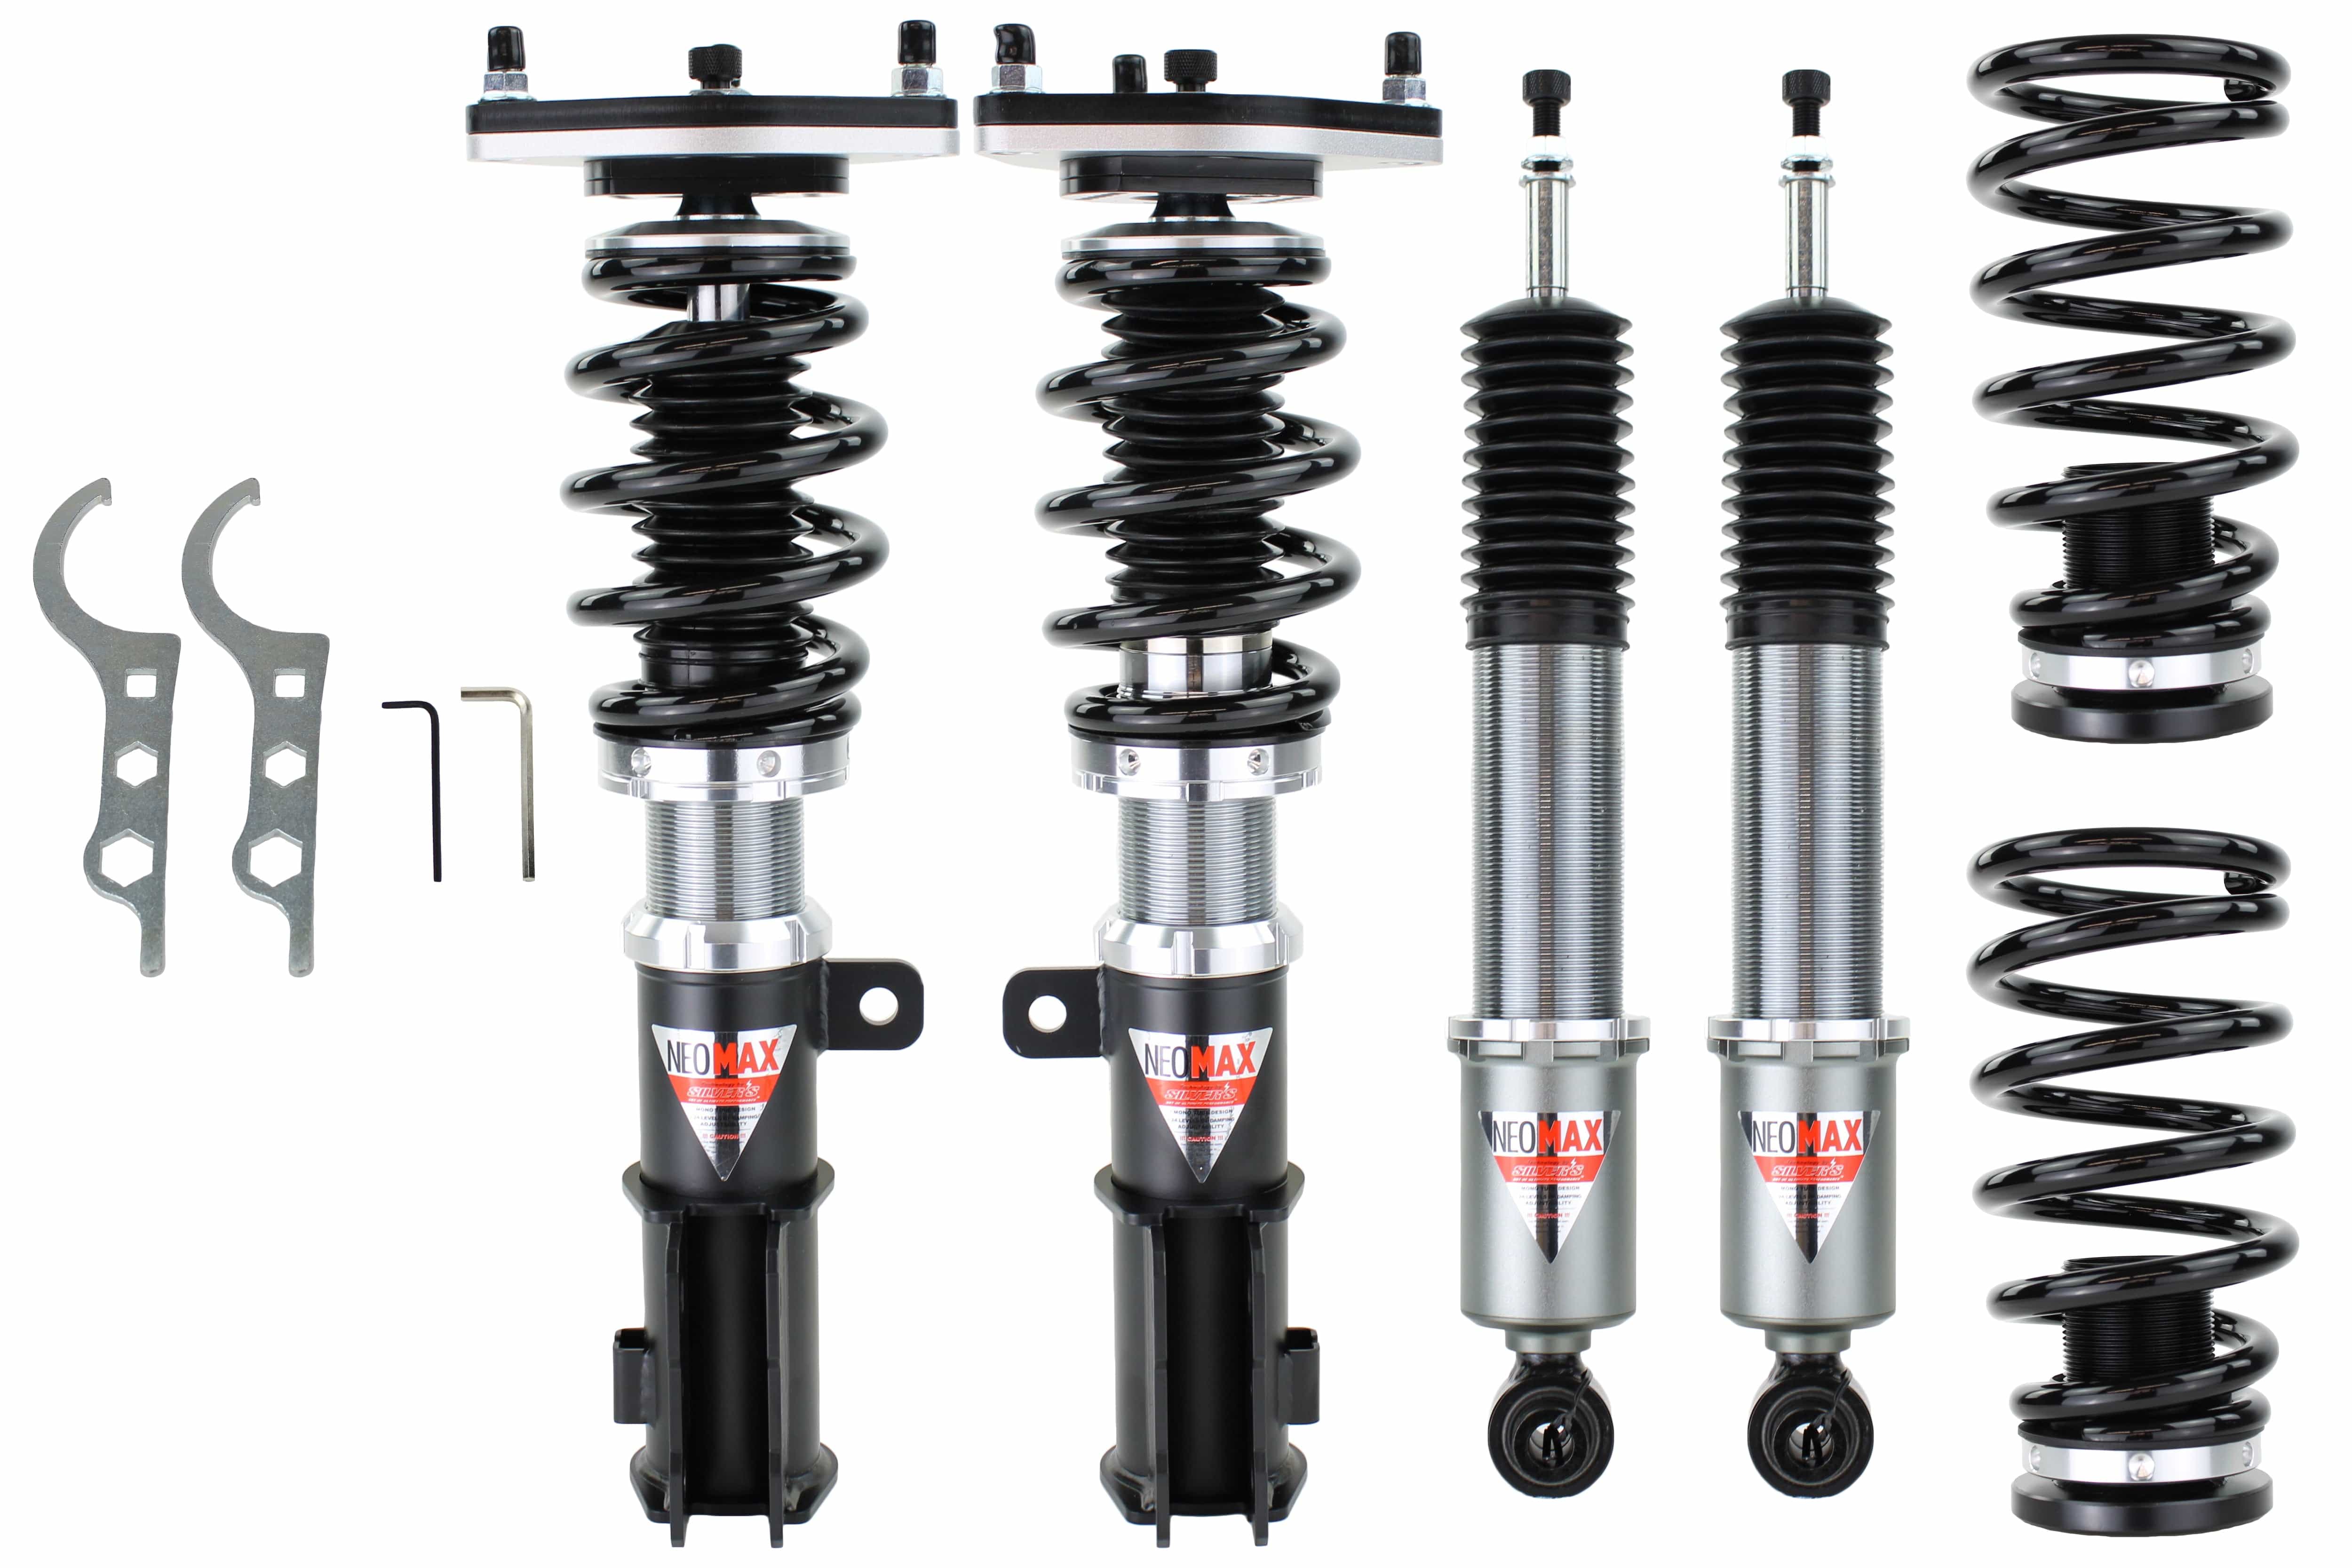 Silvers NEOMAX Coilovers for 2008-2012 Hyundai Genesis Coupe (Gen 1)